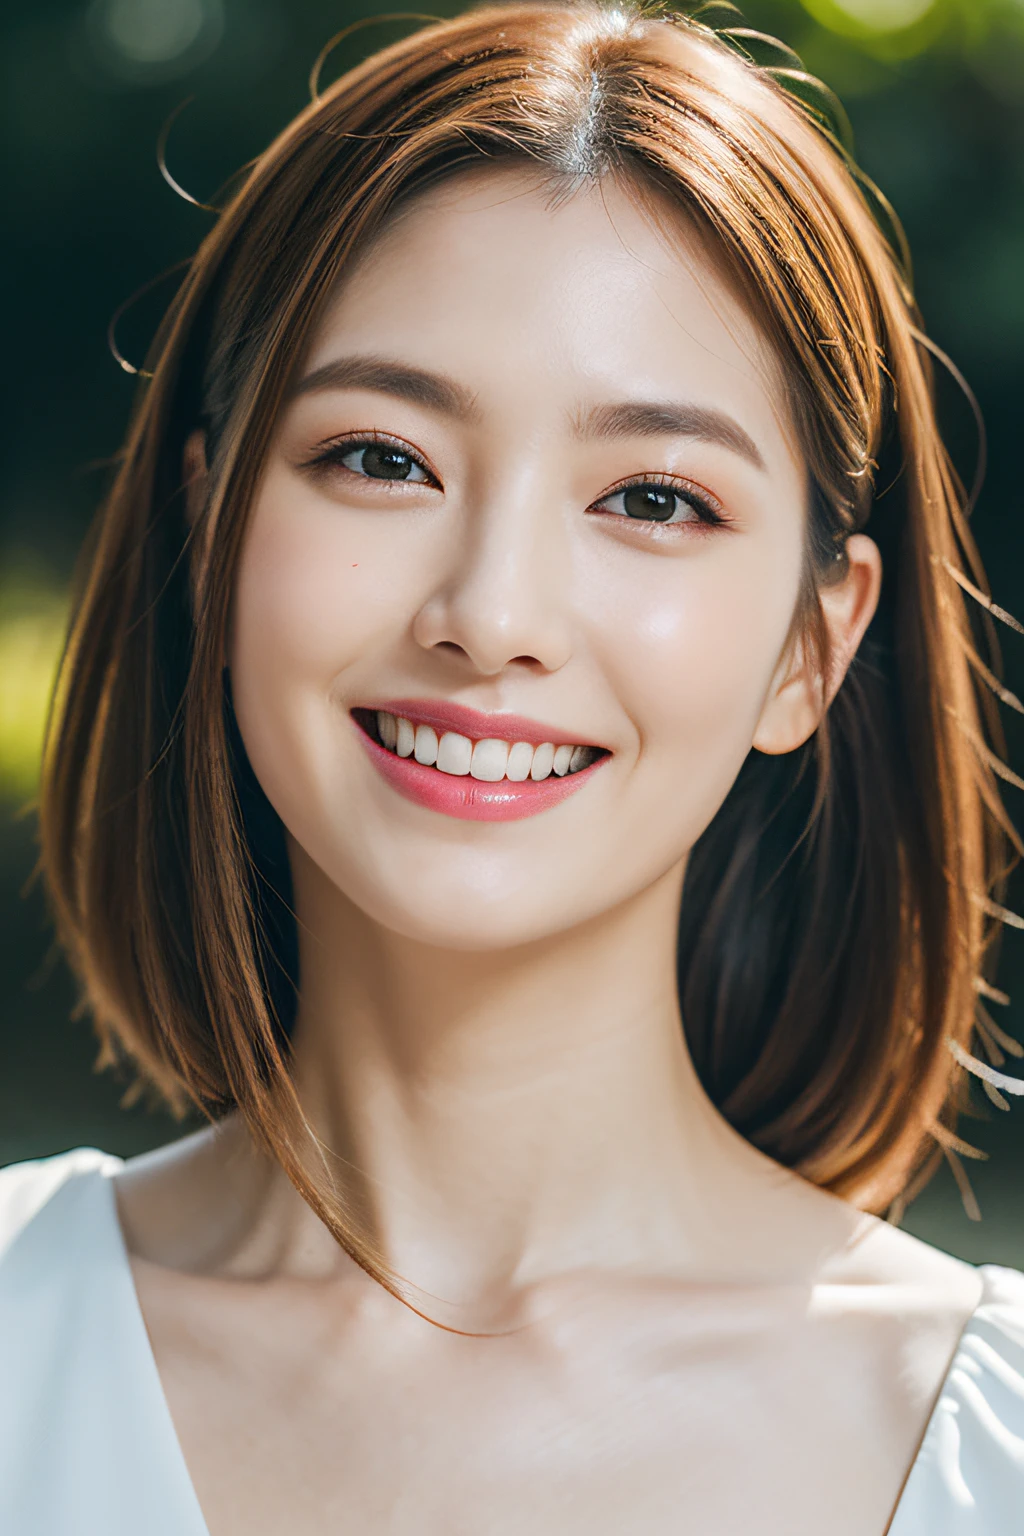 8K、Raw photography、Photorealsitic、top-quality、​masterpiece、hight resolution、26 year old、lipgloss、Eye lashes、A smile、Bright face、glistning skin、depth of fields、chromatic abberation、Wide illumination、Natural shades、Calm bliss、Diffuse light viewer